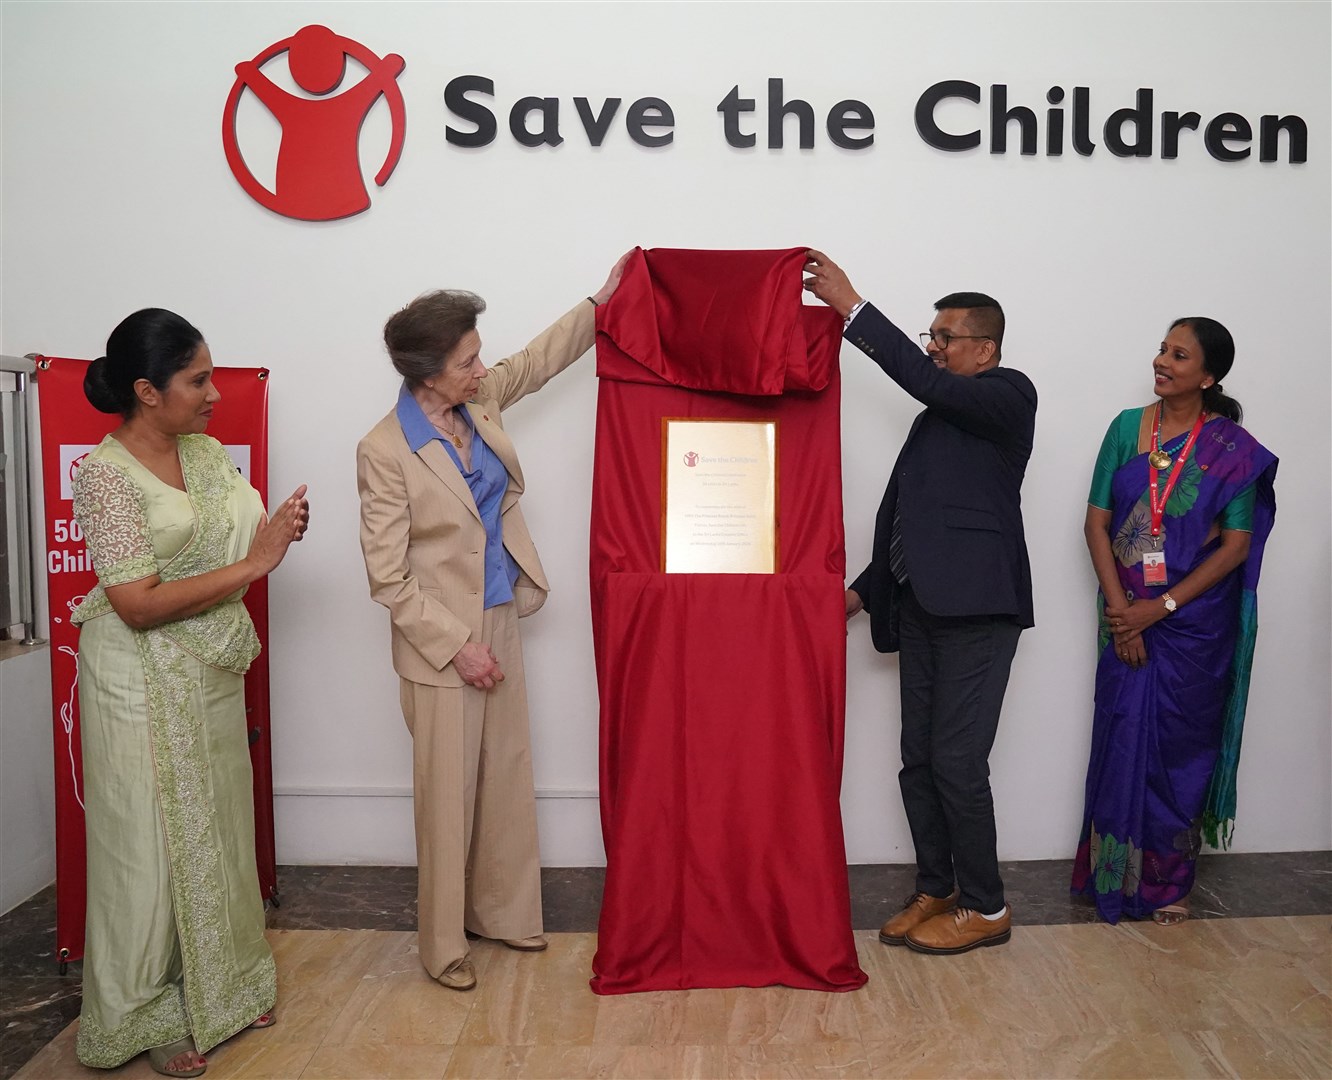 The Princess Royal unveils a plaque during a visit to Save the Children’s HQ in Colombo, Sri Lanka (Jonathan Brady/PA)